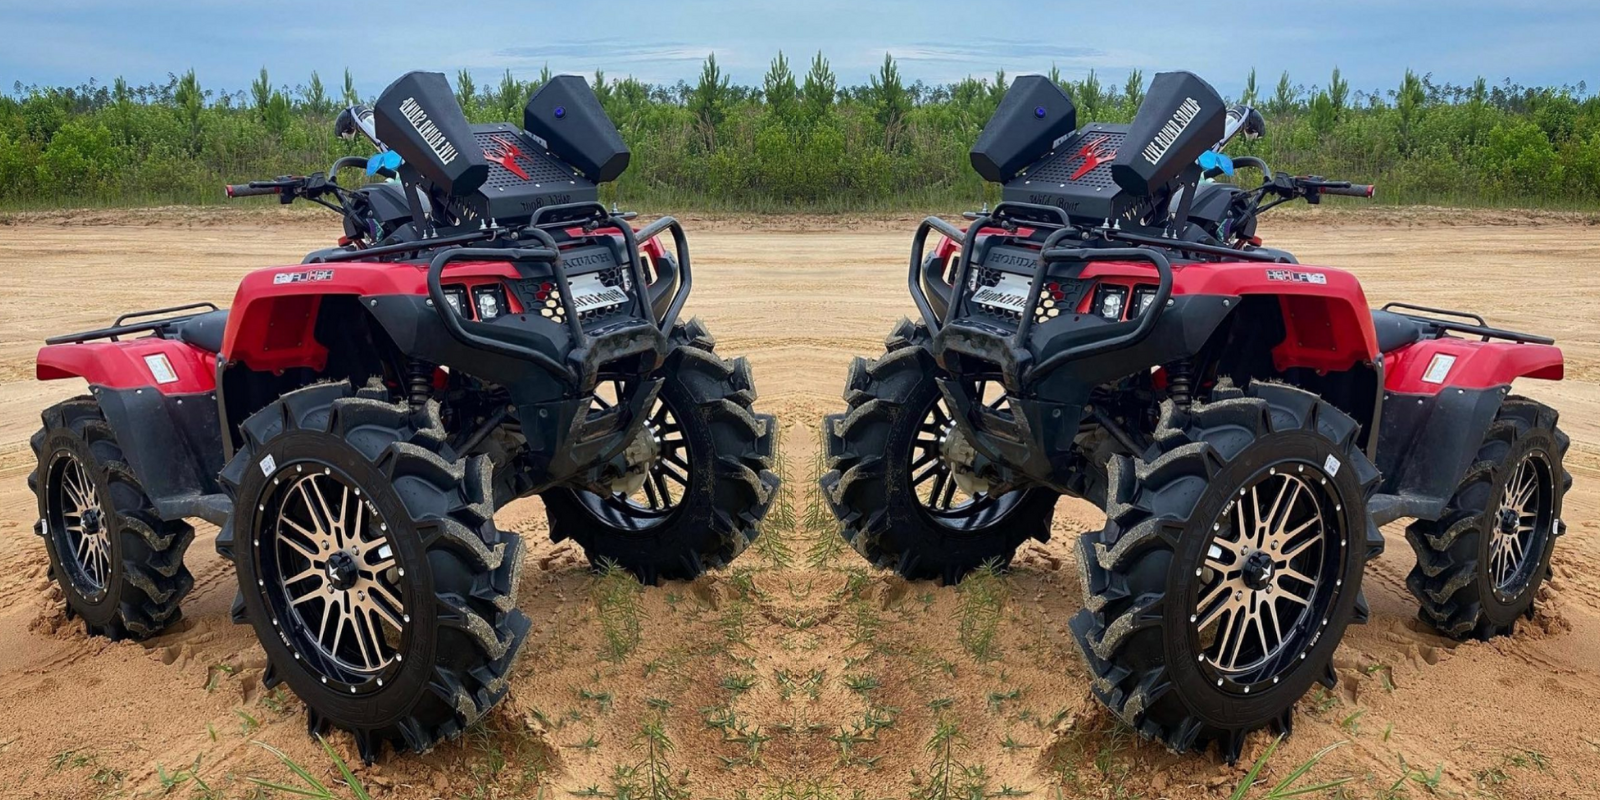 Comprehensive ATV services for maintenance, repairs, and customization. Trust our expert team to keep your all-terrain vehicle in peak condition for your off-road adventures.